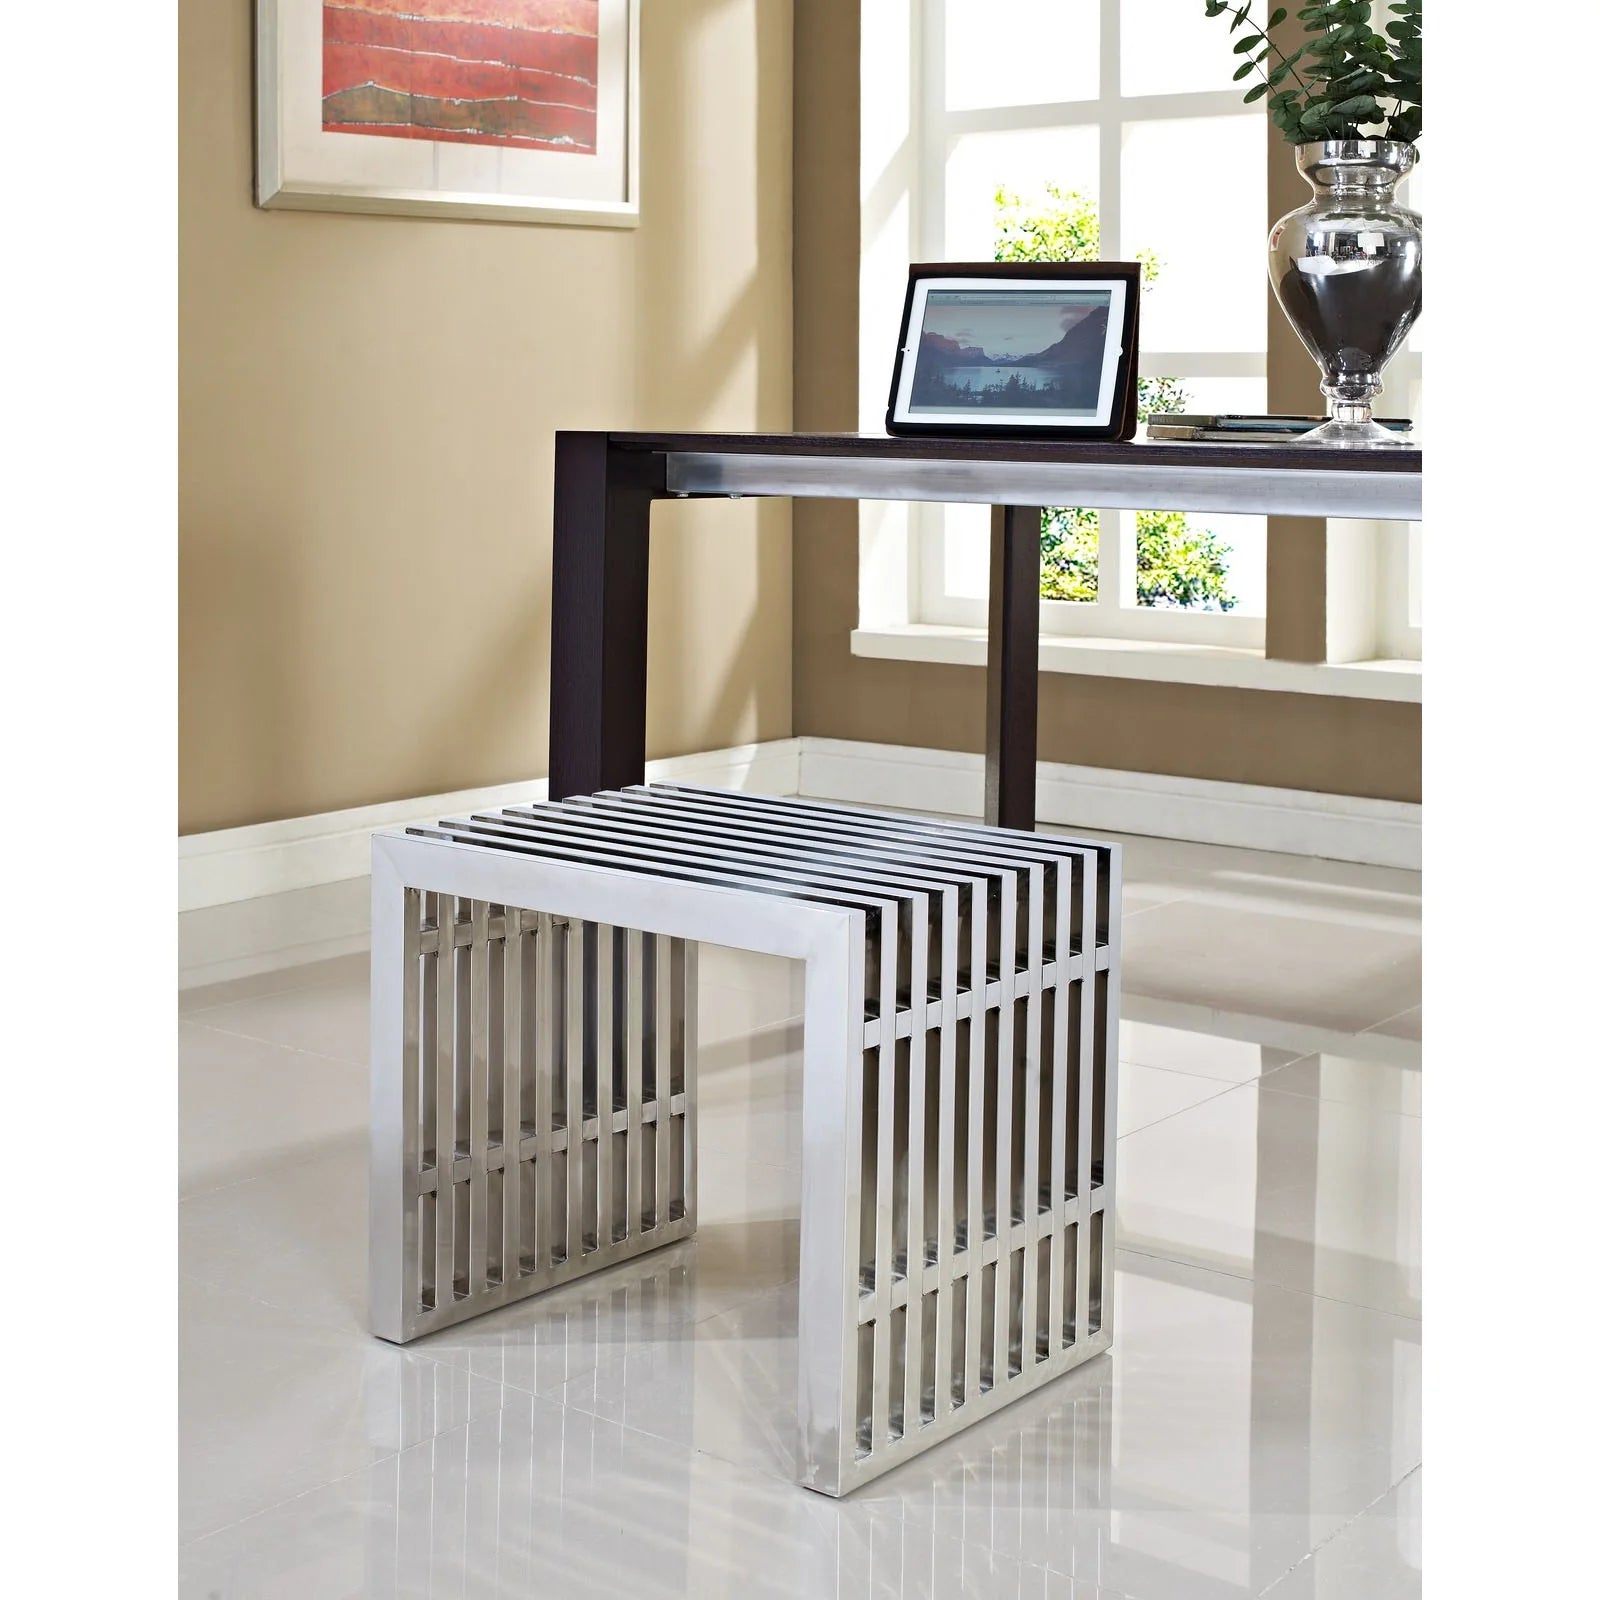 Gridiron Stainless Steel Bench - Small